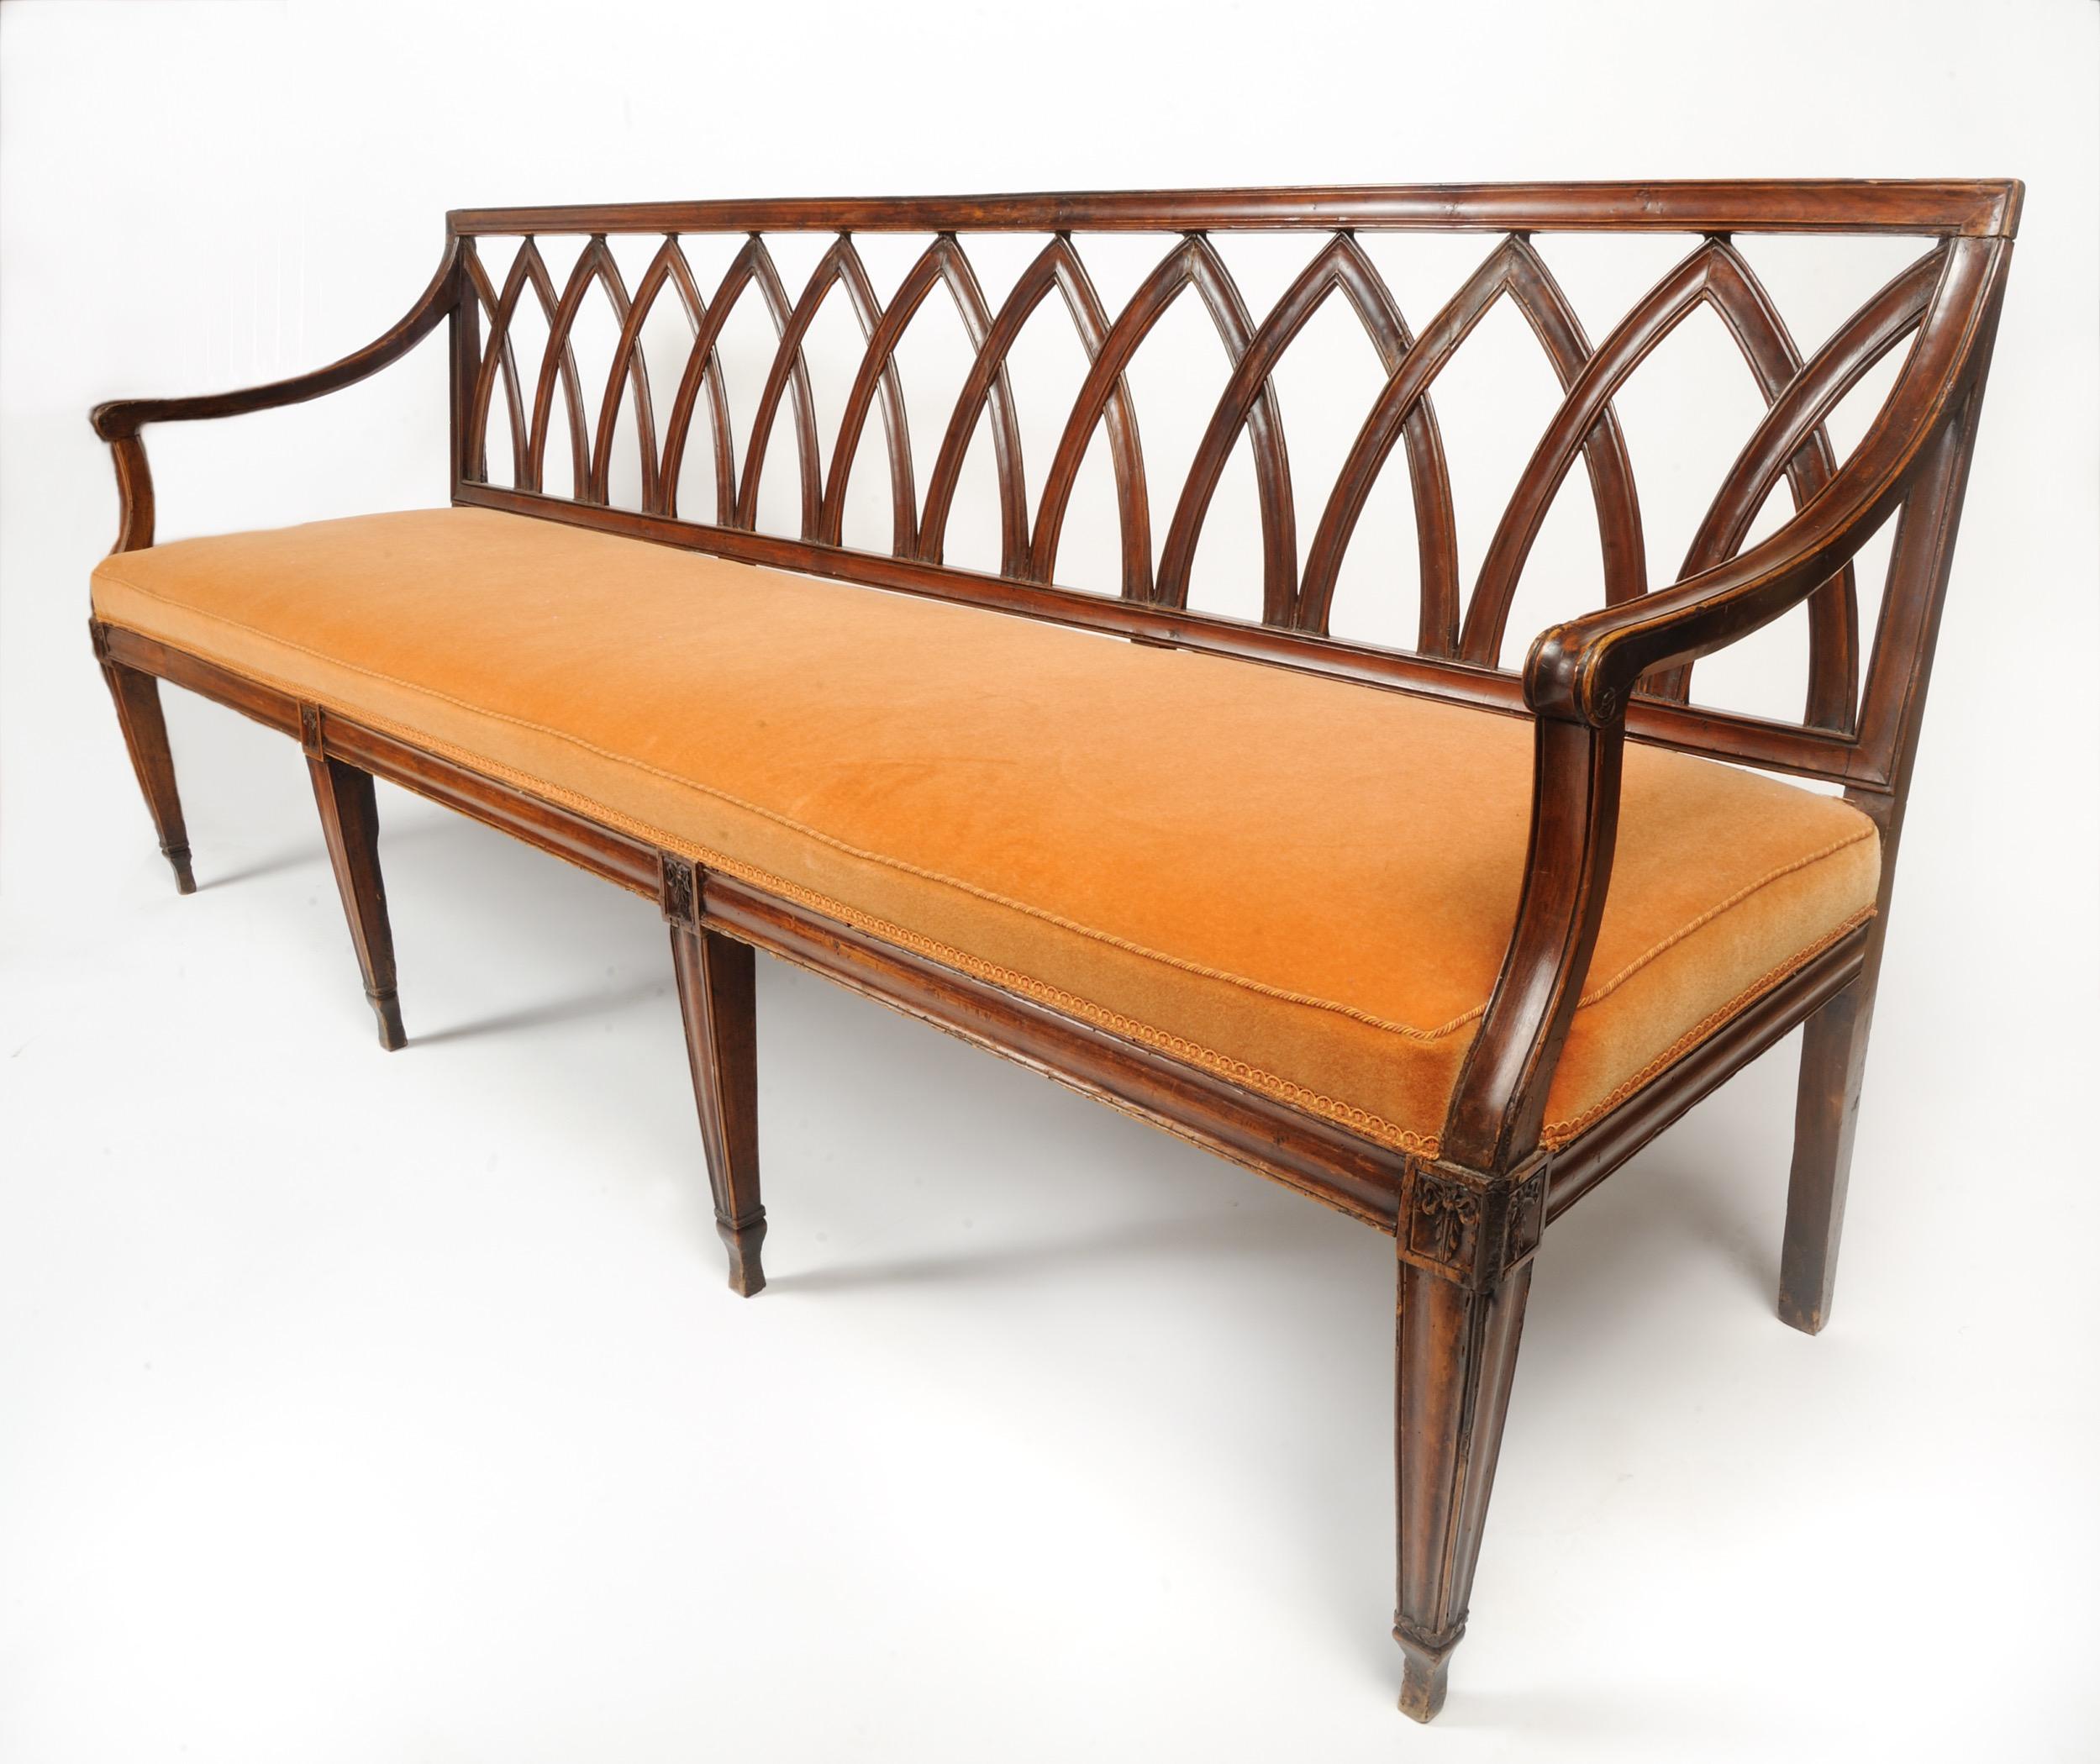 Hand-Carved 19th Century French Directoire Bench